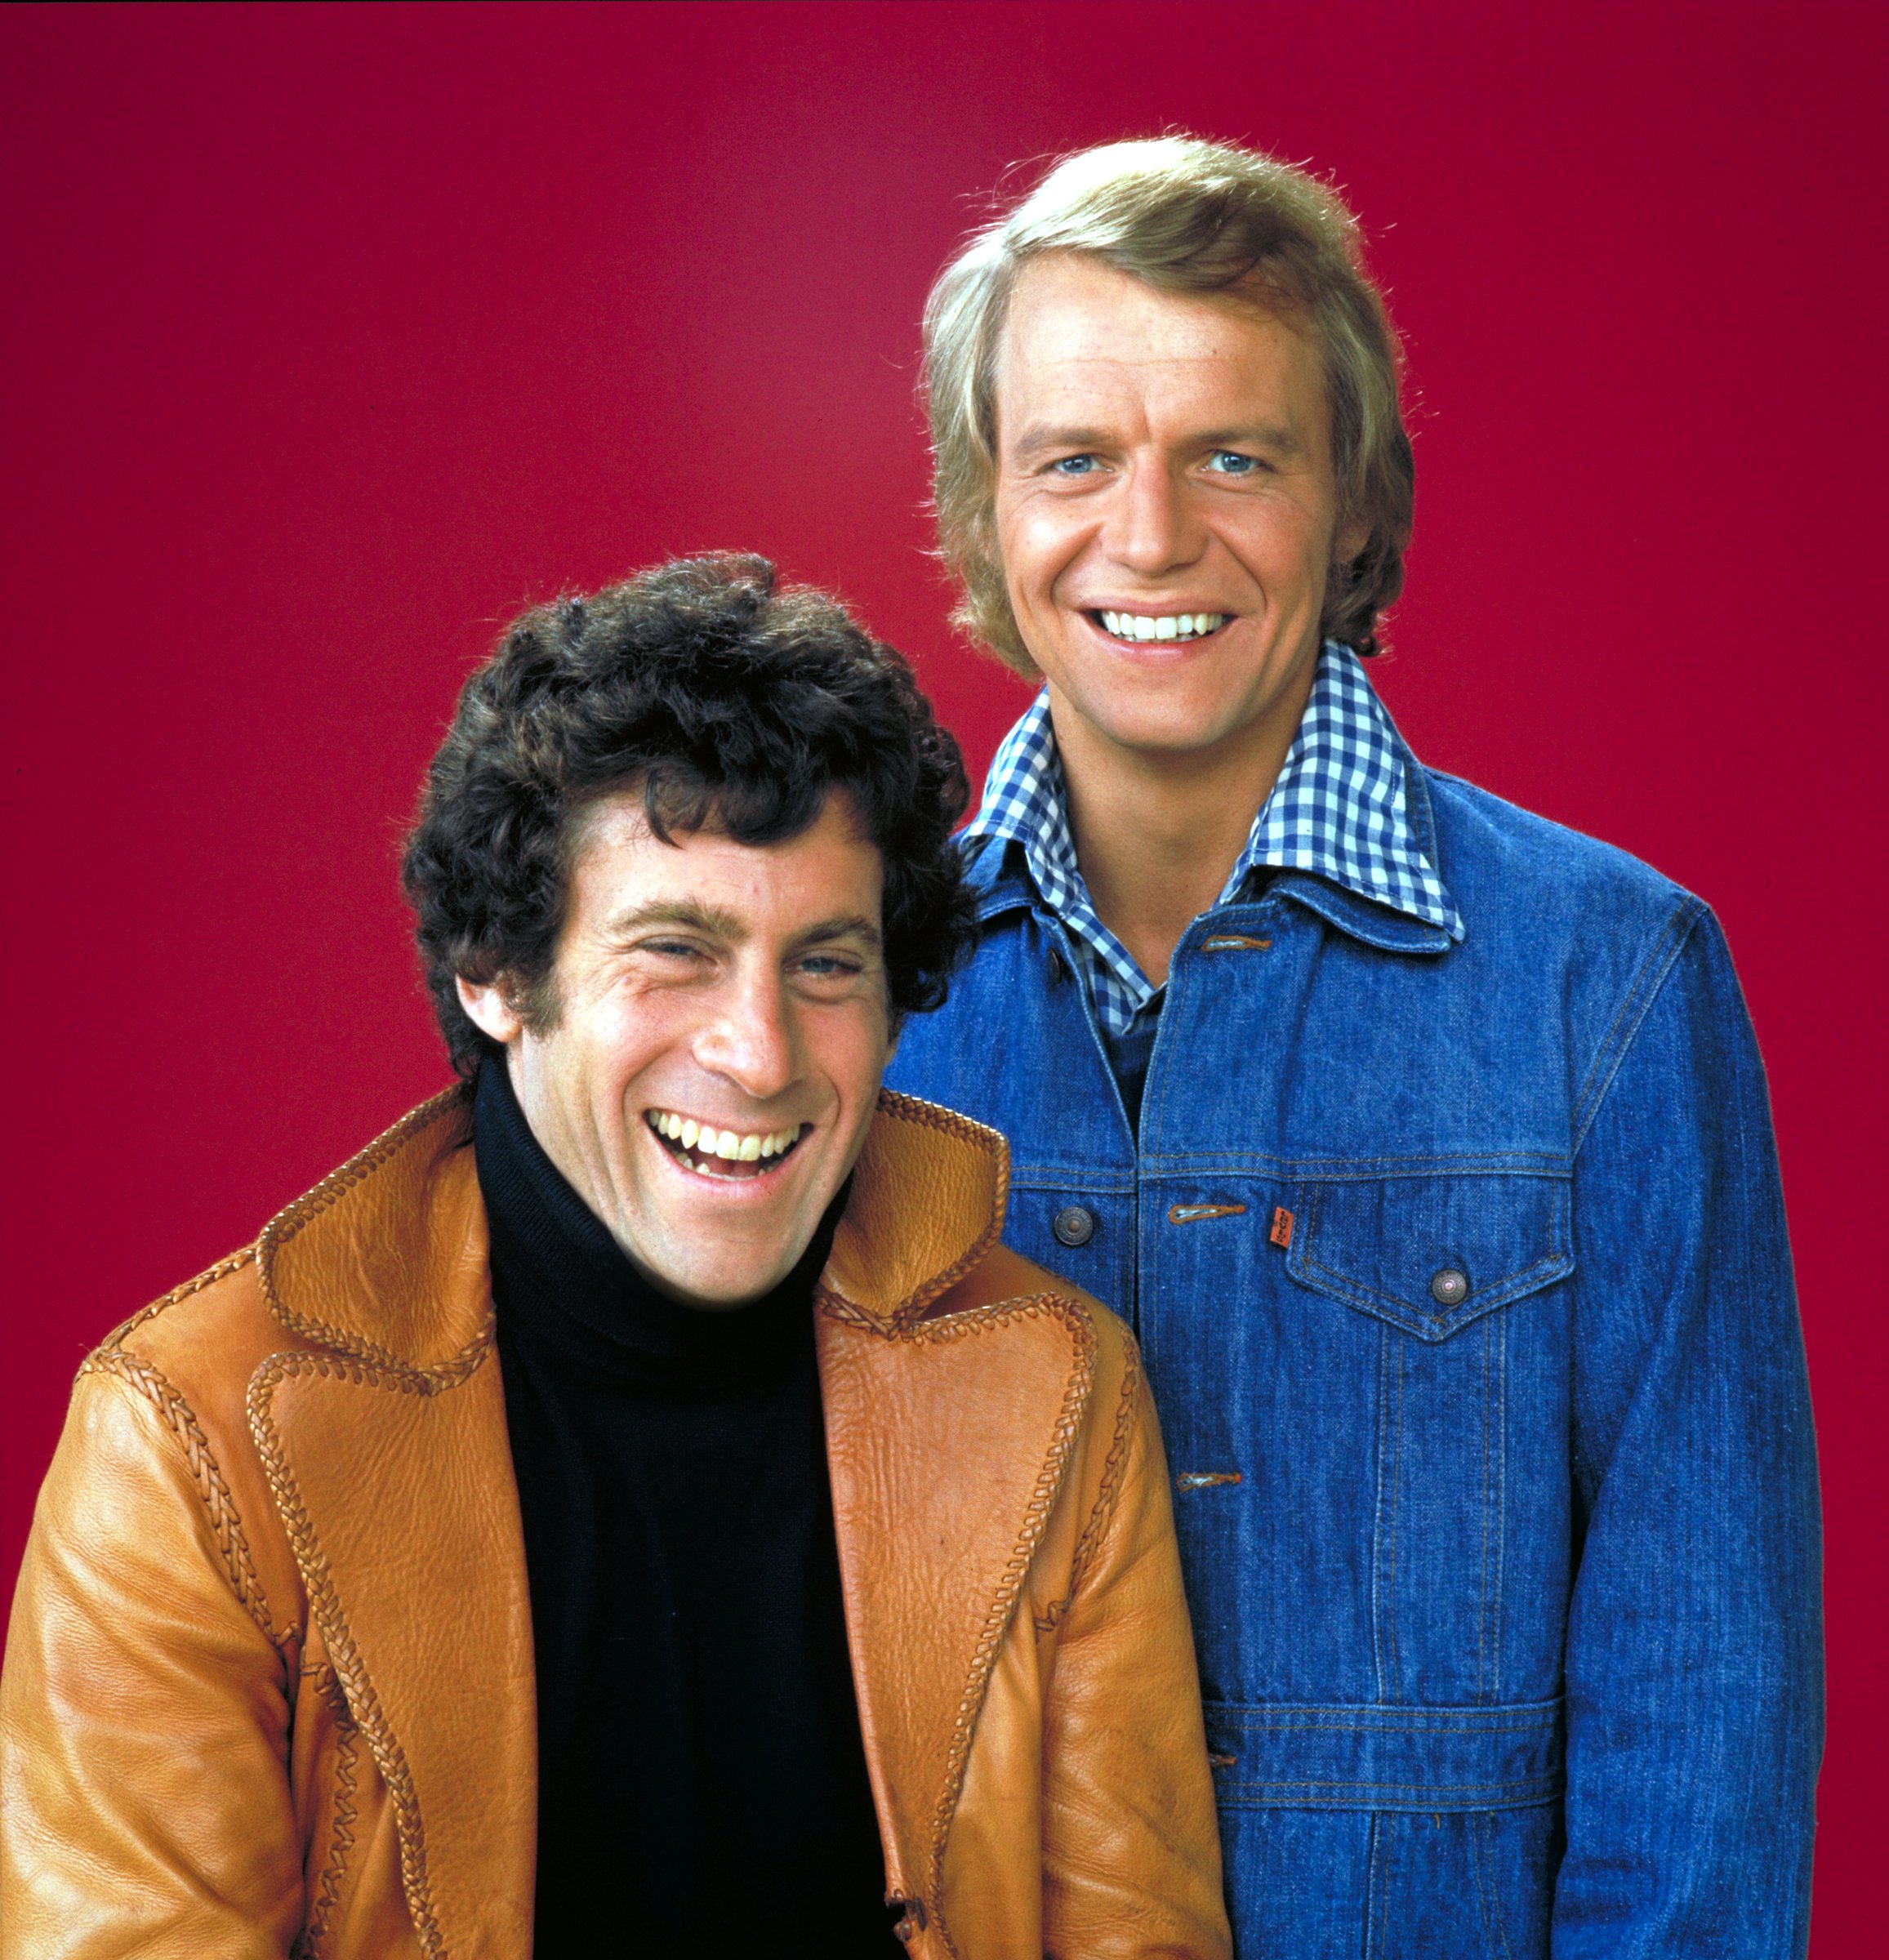 (L-R) Actors Paul Michael Glaser as David Starsky and David Soul as Kenneth "Hutch" Hutchinson in the drama series, "Starsky & Hutch" on June 16, 1975. | Source: Getty Images